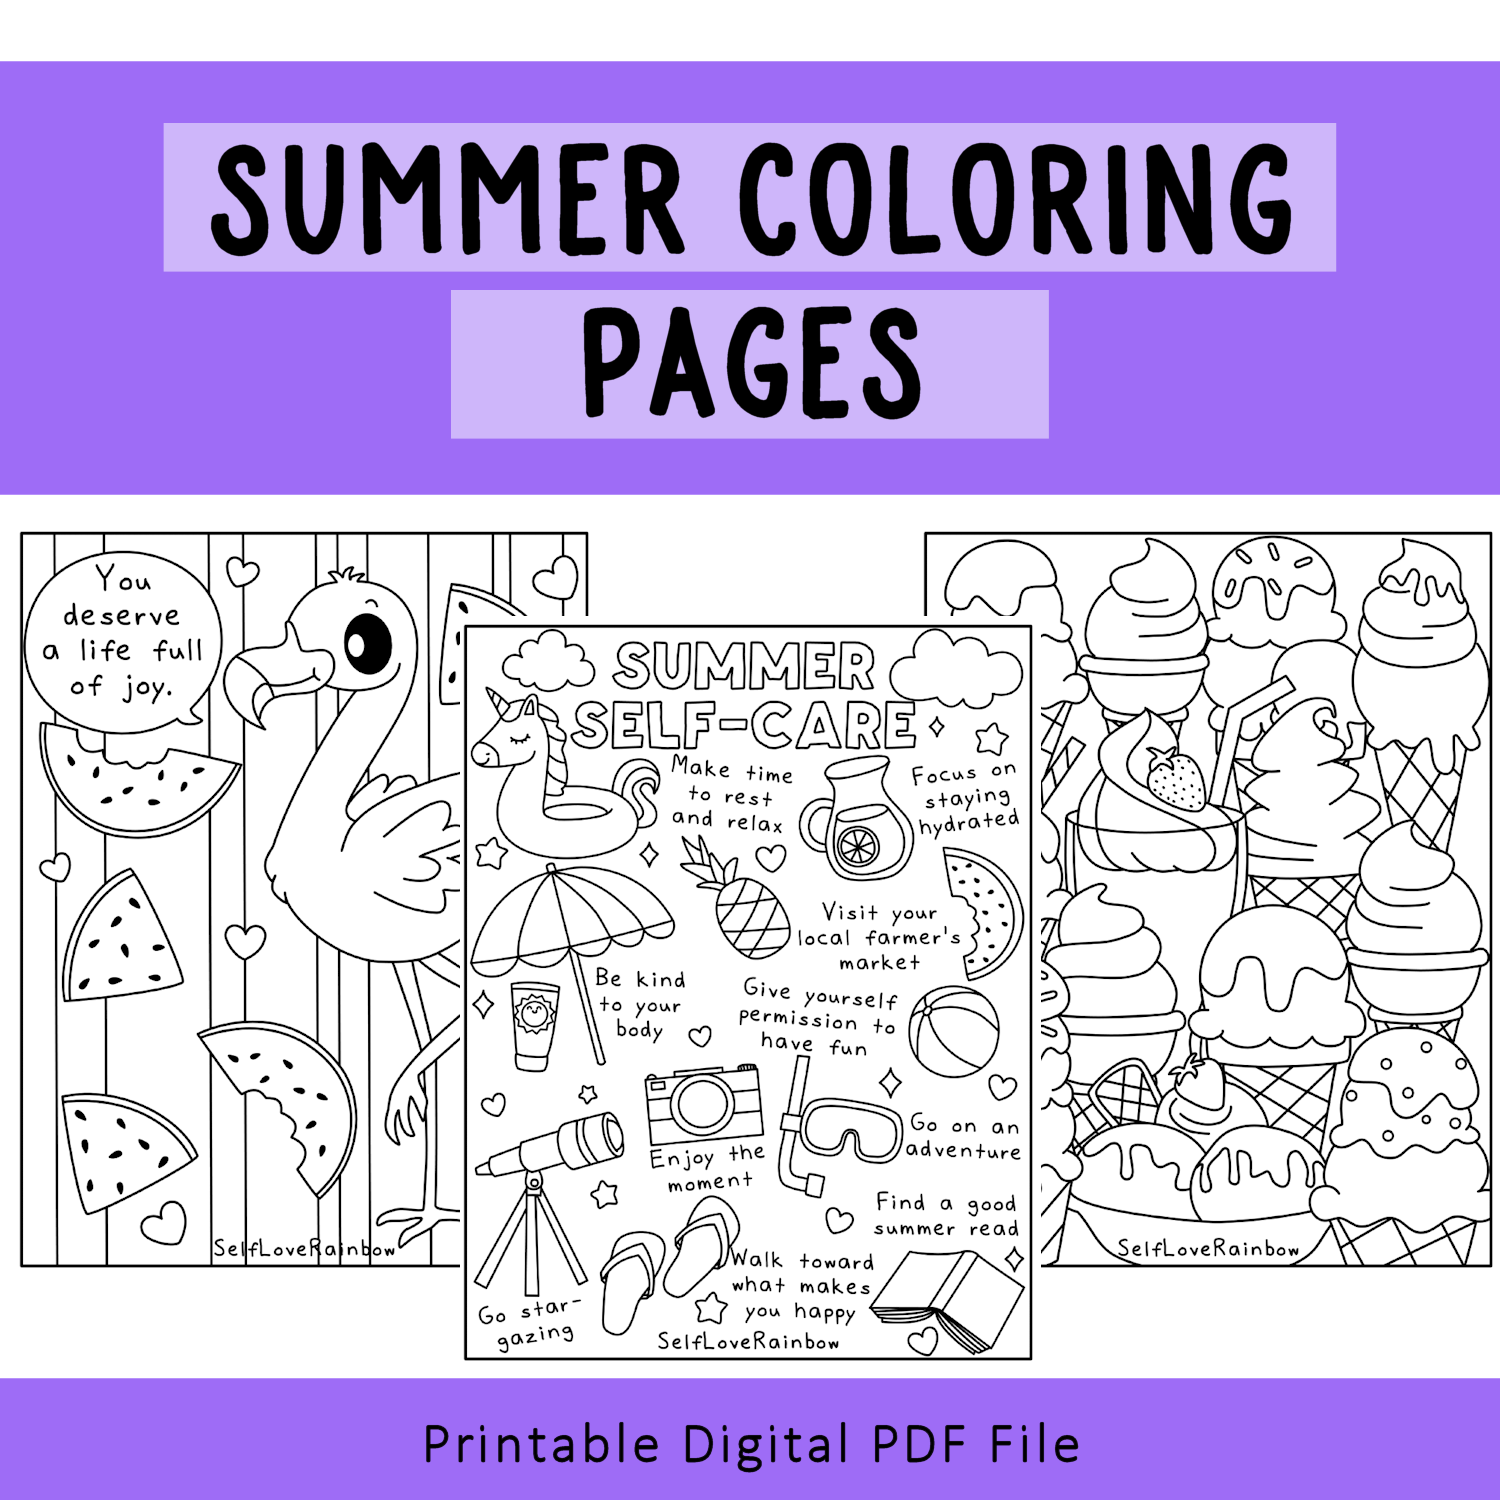 Summer-Themed Coloring Pages – SelfLoveRainbow